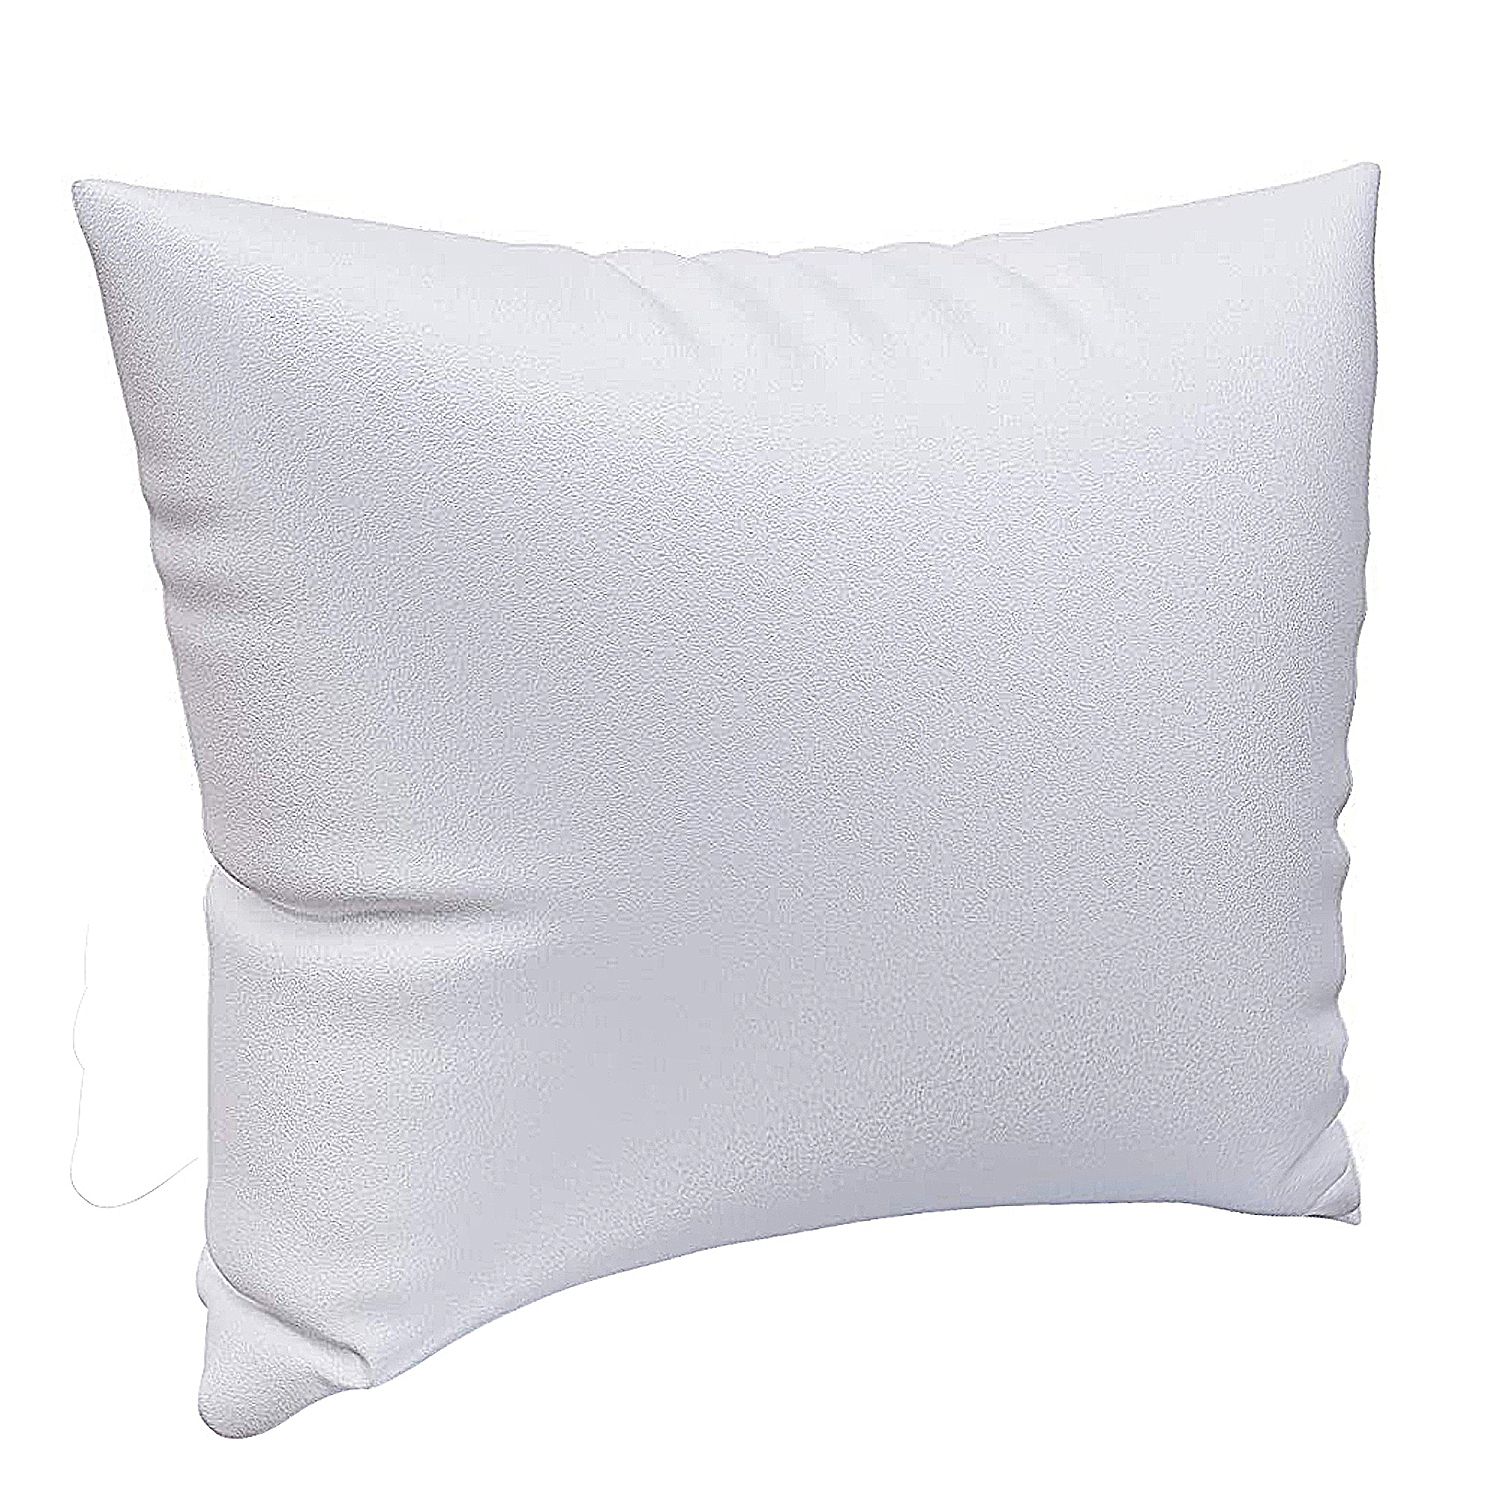 Pregnancy Pillow With Washable Cover